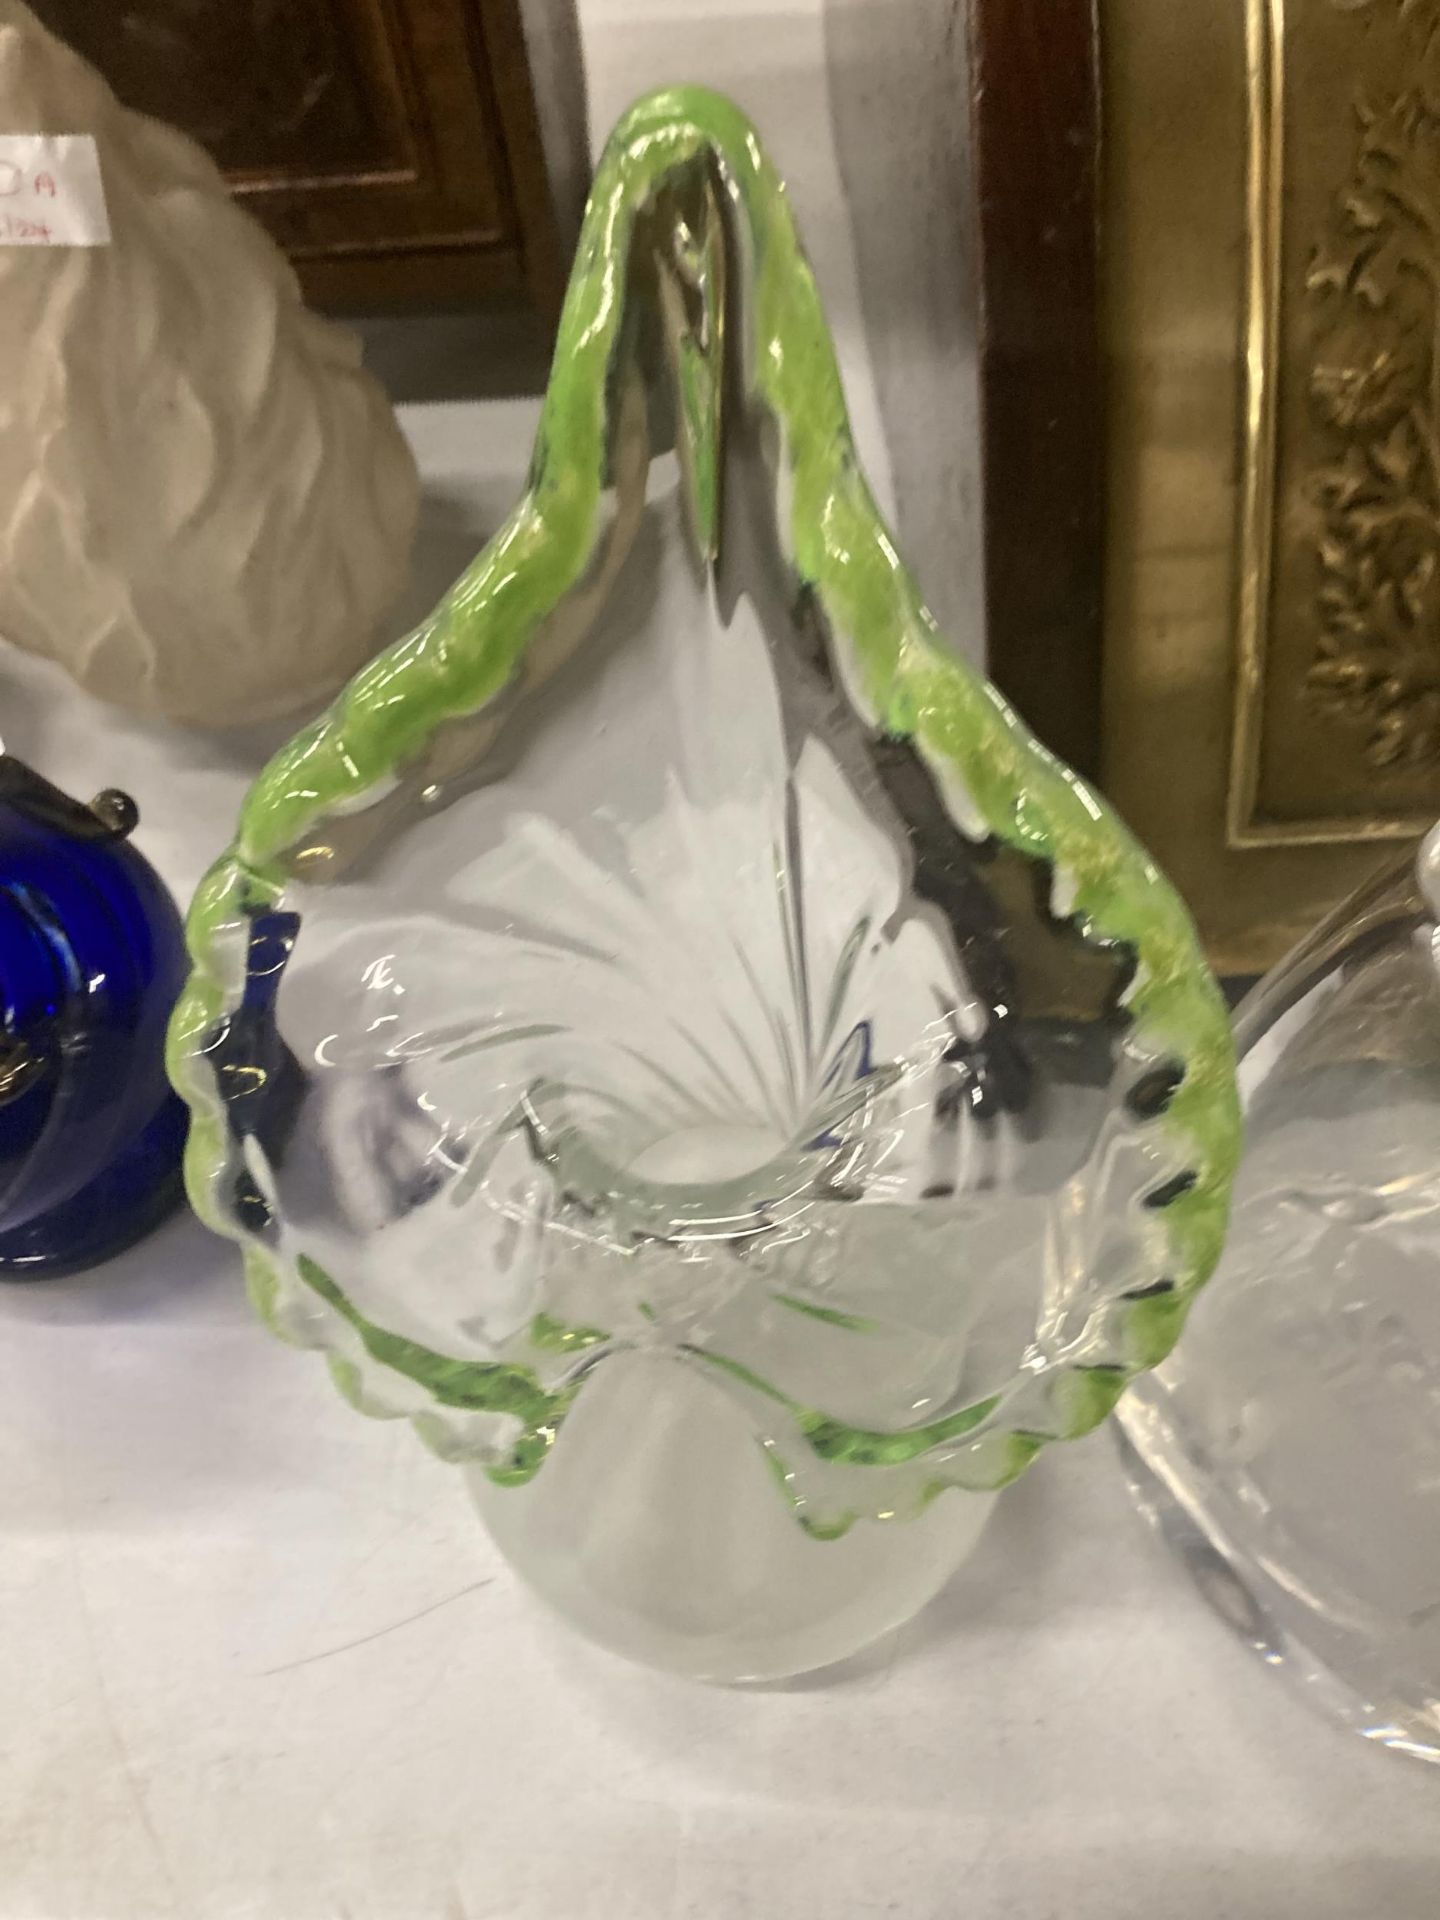 TWO GLASS VASES TO INCLUDE ONE WITH AN ENGRAVING OF HORSES PLUS AN ART GLASS VASE - Image 2 of 3